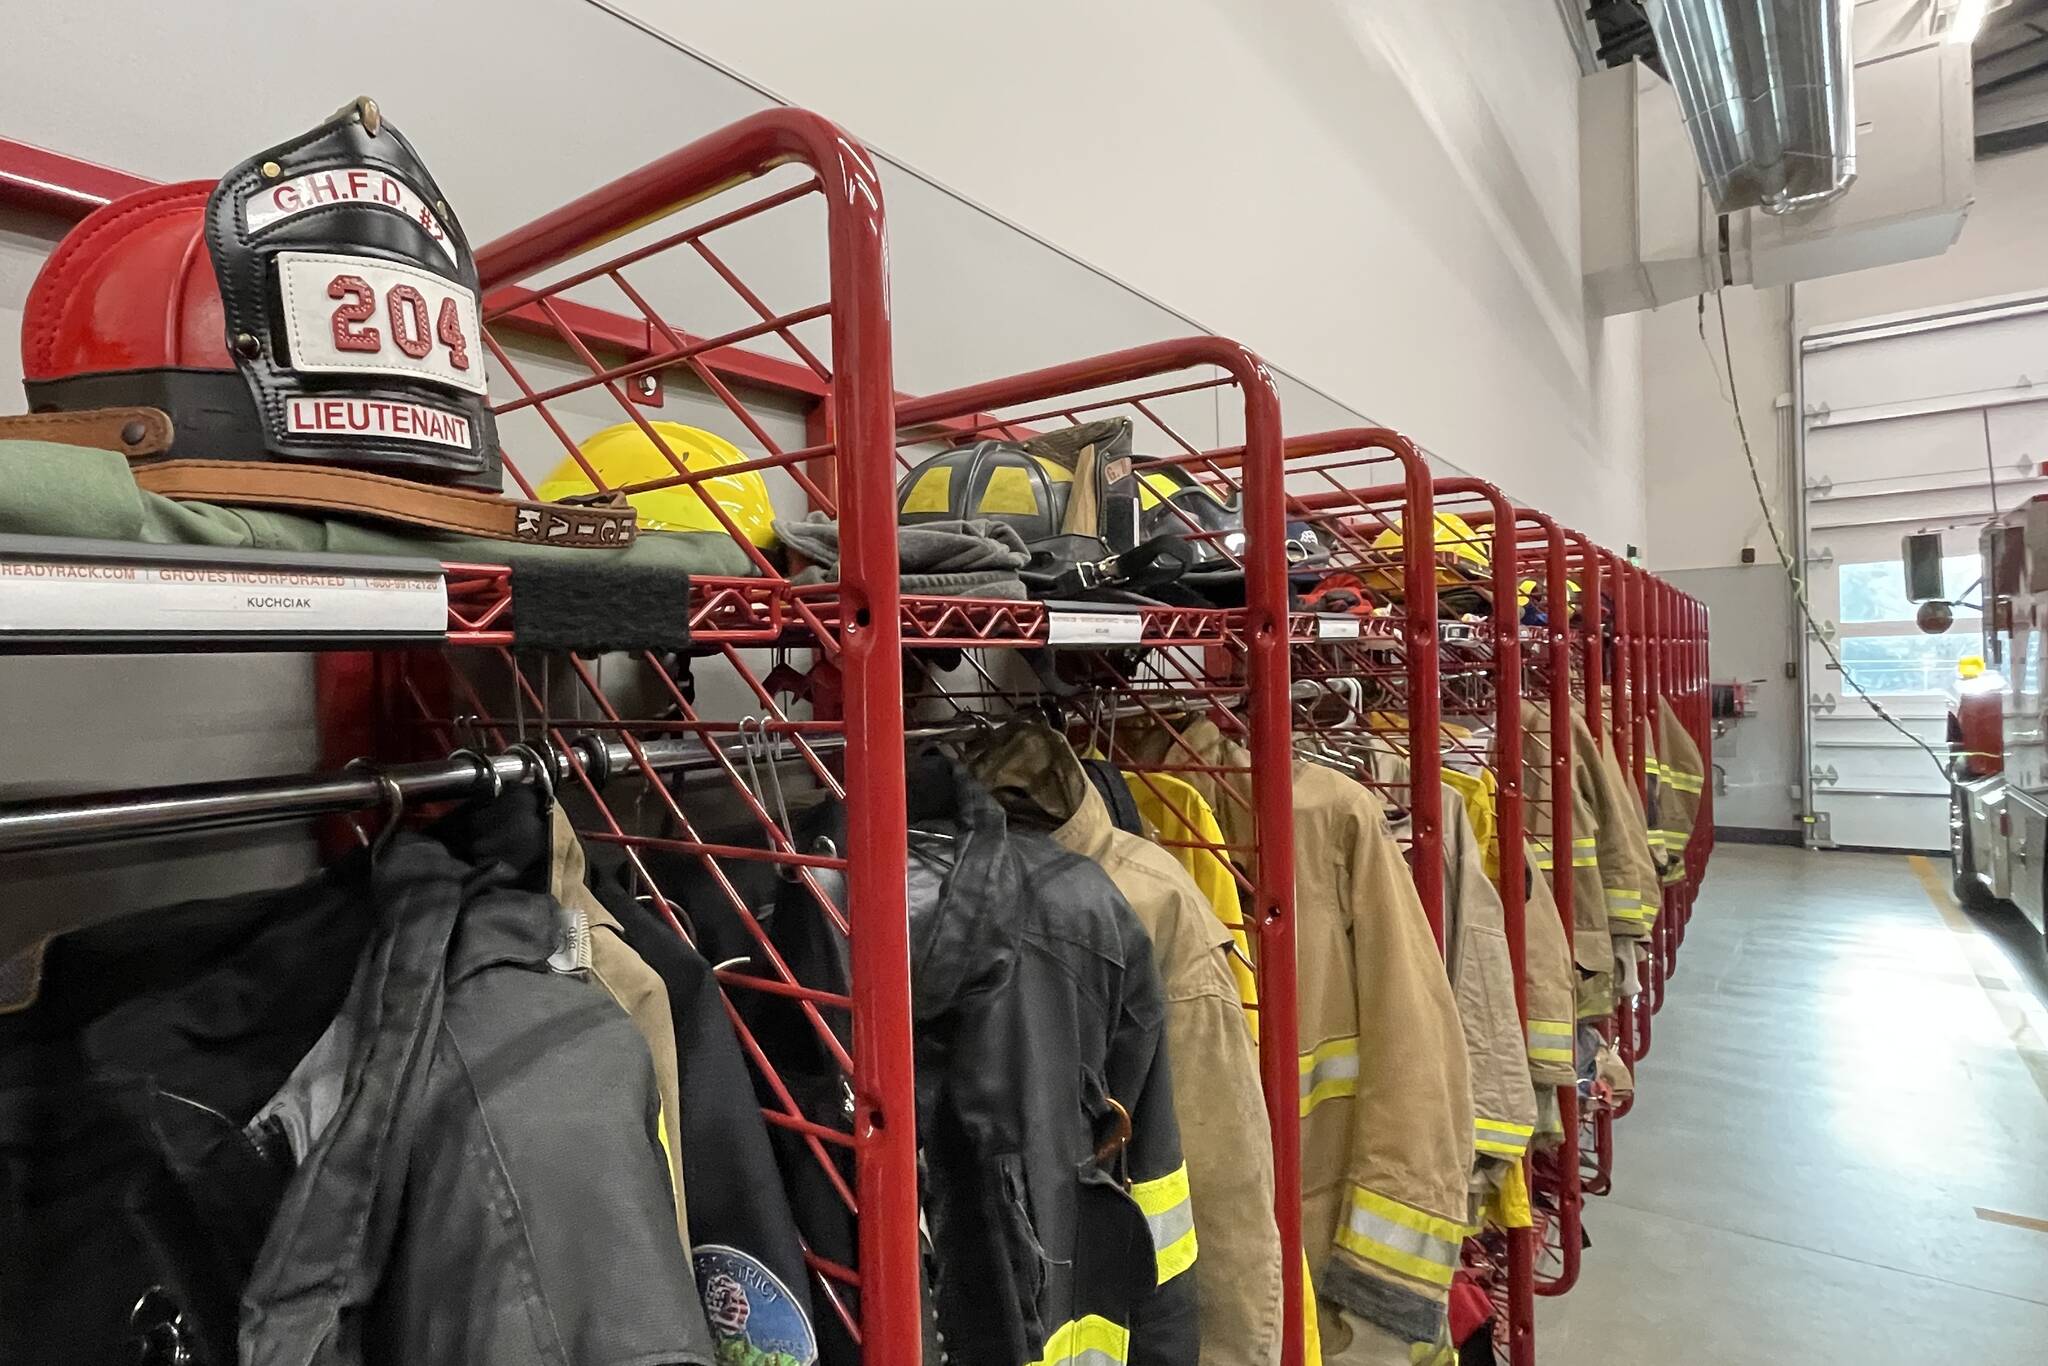 MIchael S. Lockett / The Daily World
Staffing requirements for fire departments across Grays Harbor County are a constant balancing act, driven by a number of factors, long-standing and more recent.